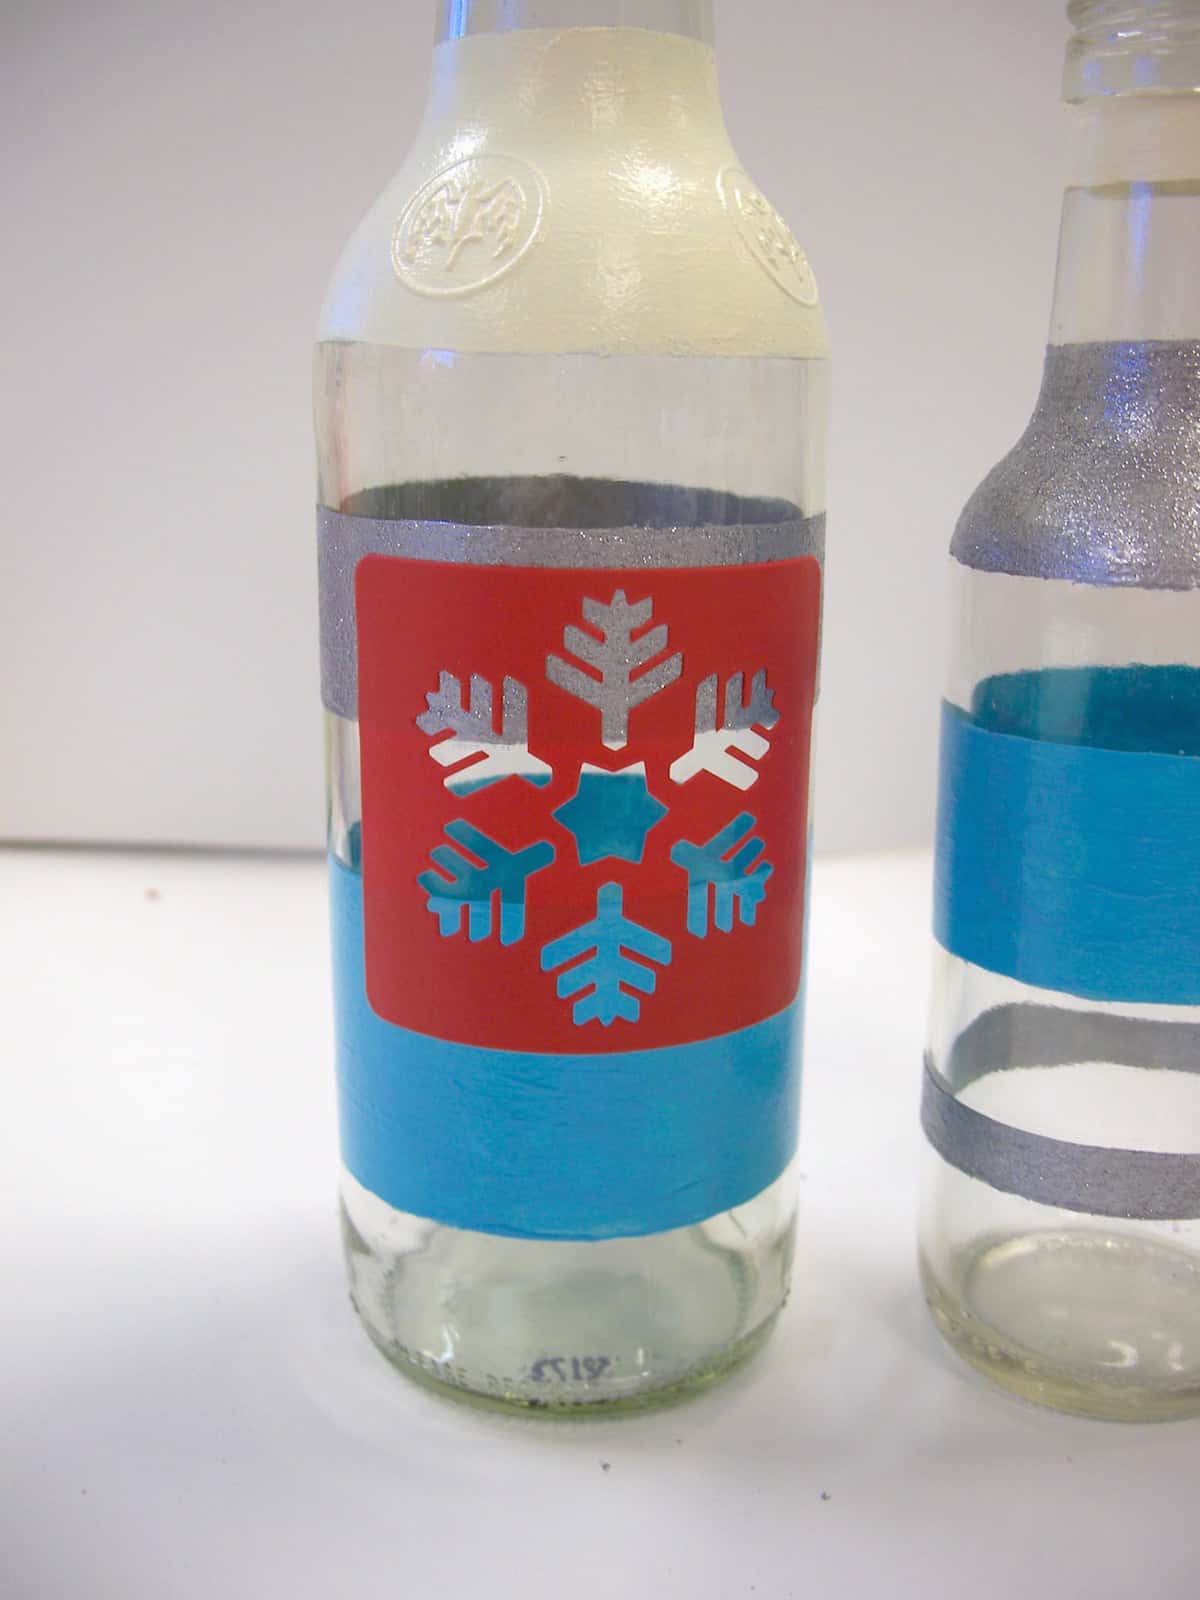 Painted bottle with a red adhesive snowflake stencil on top